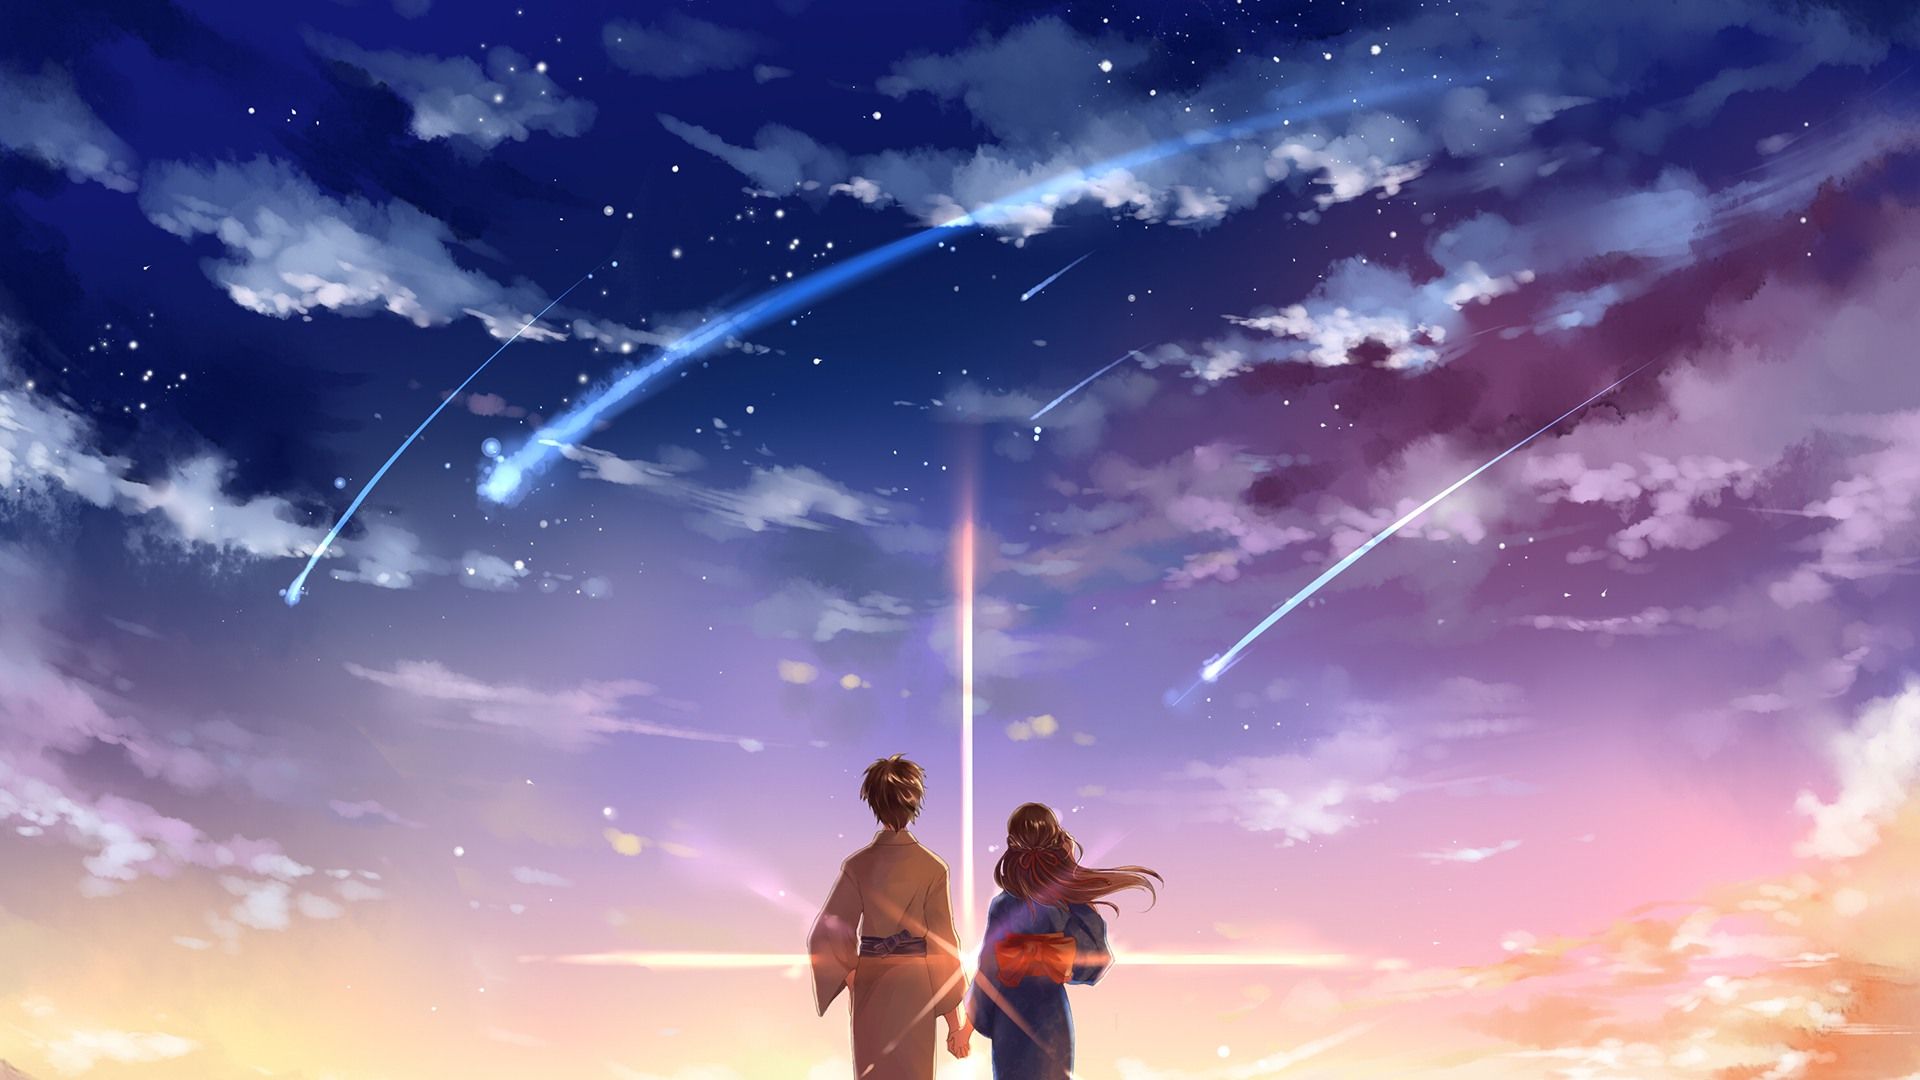 Sky Your Name Wallpaper 1920x1080